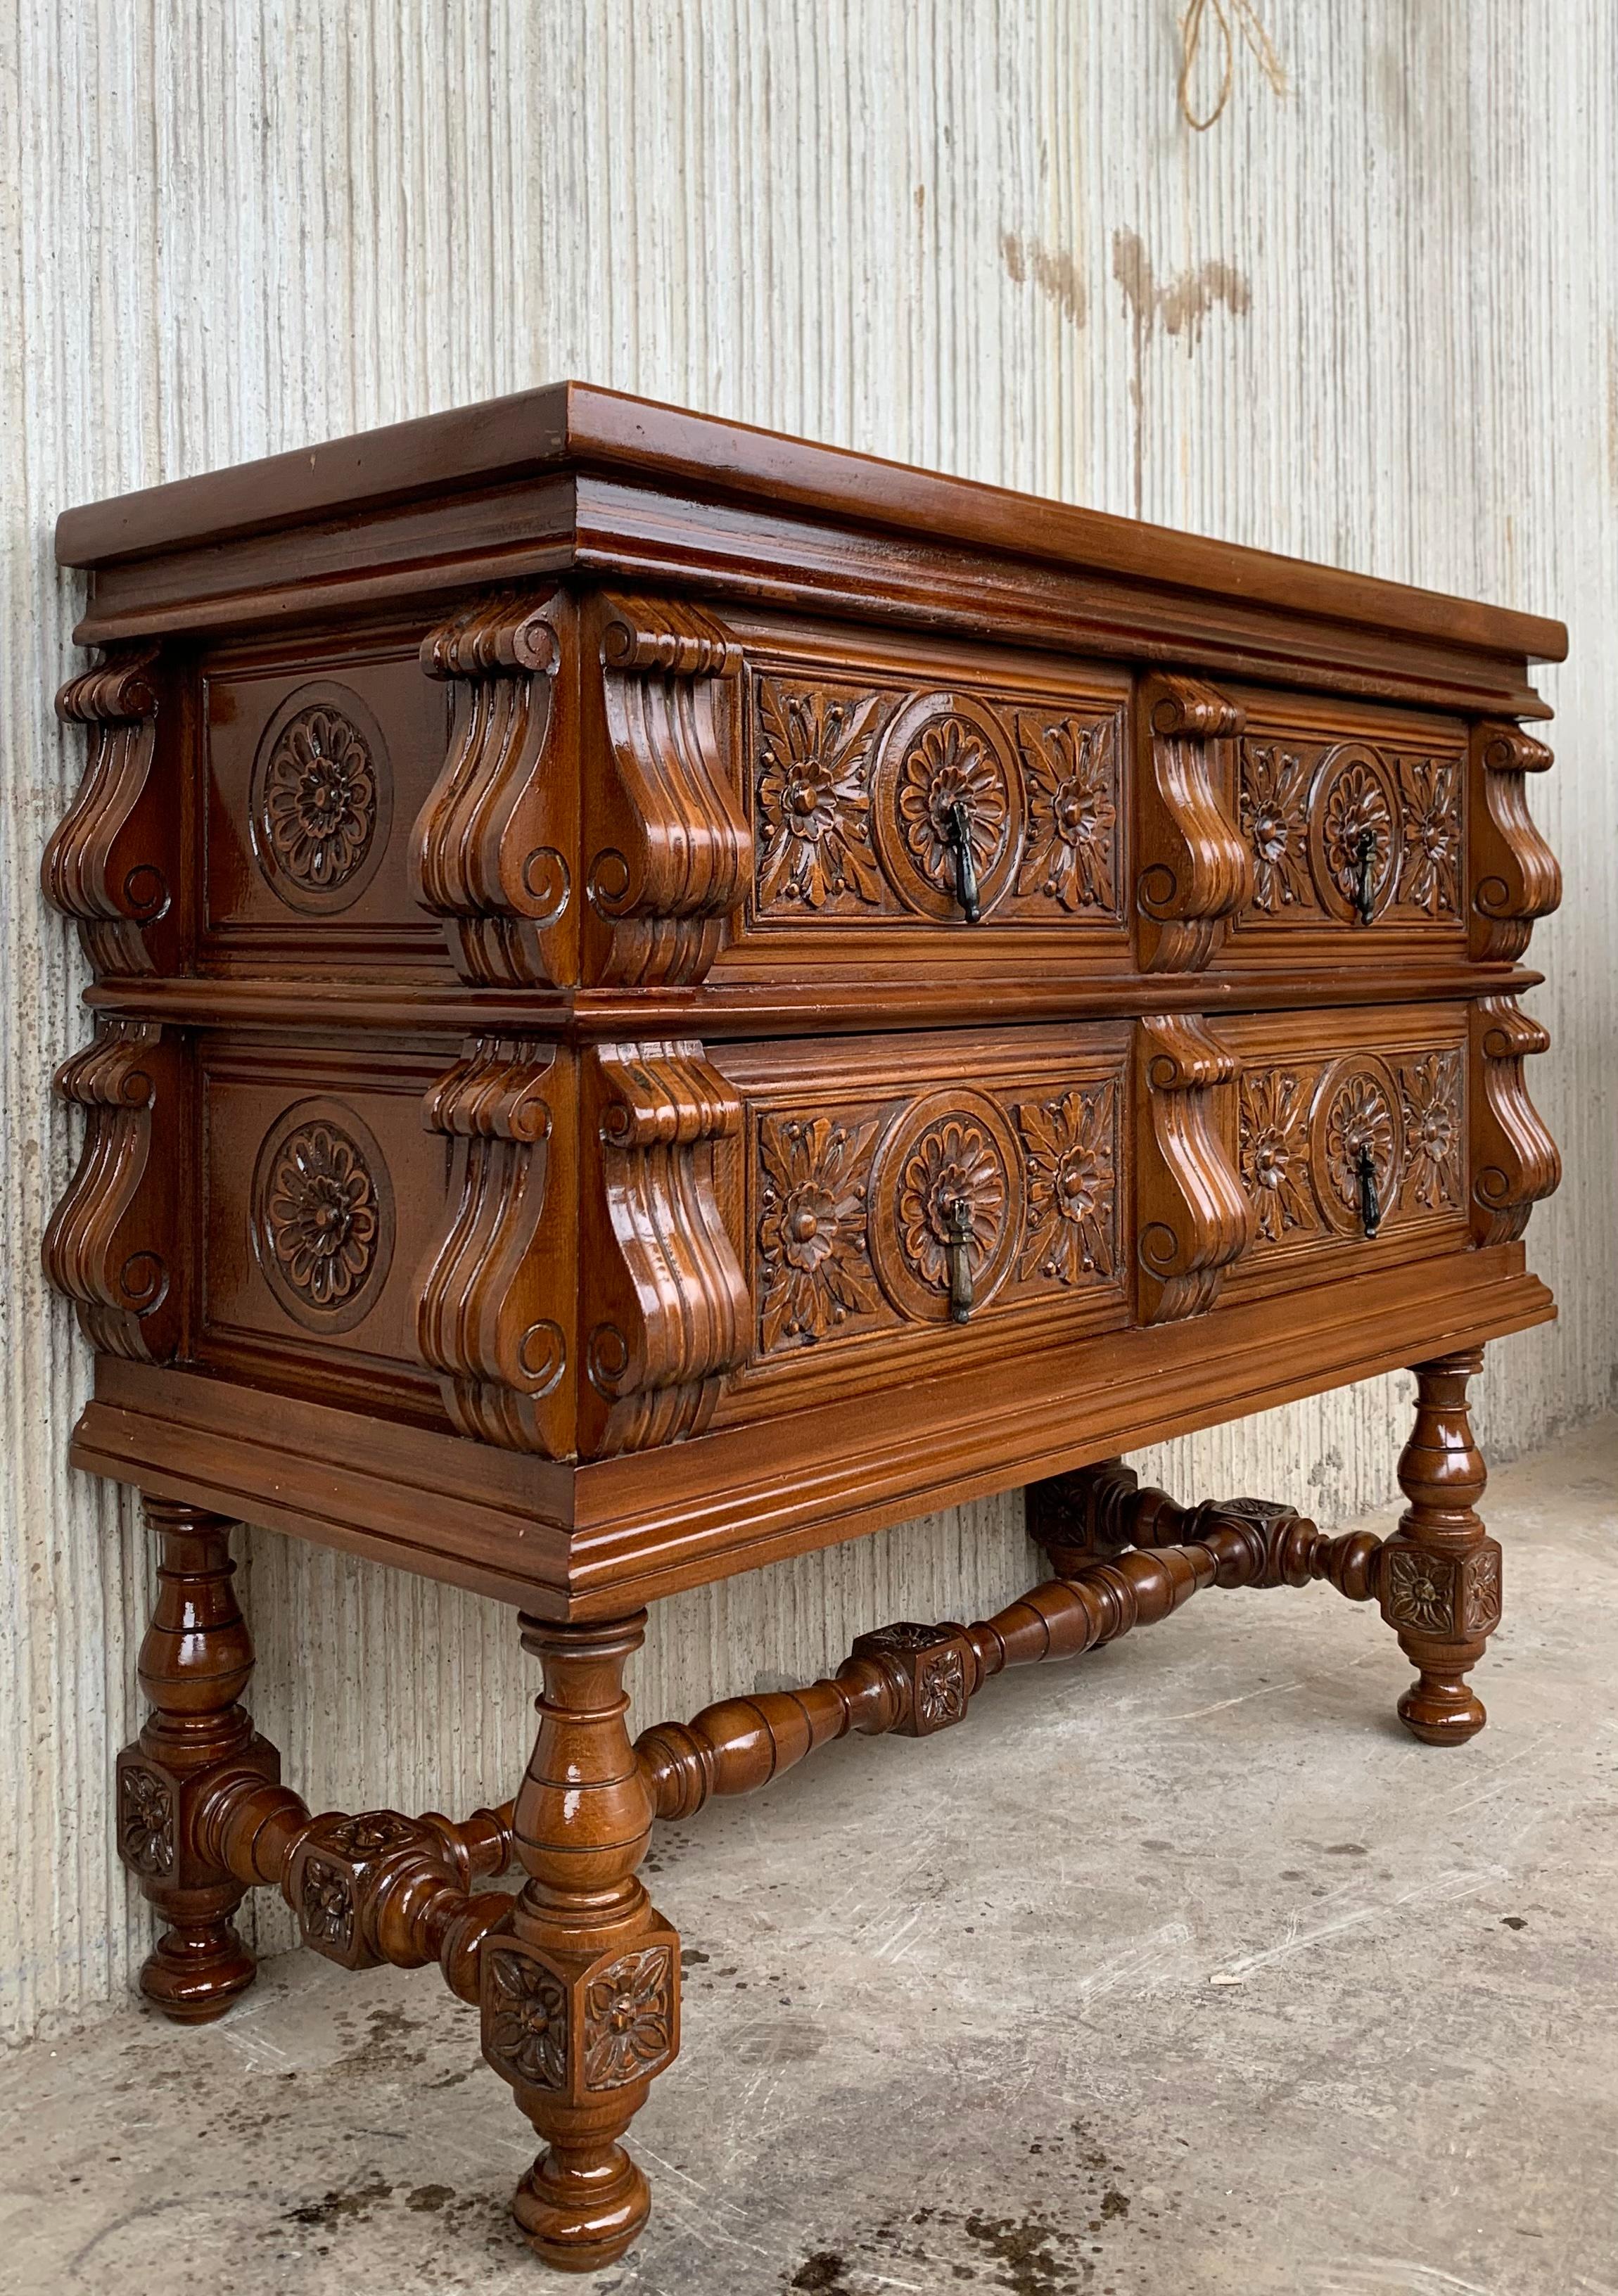 A museum quality, Spanish, Late-Renaissance, cedar enclosed chest of drawers with exceptional walnut and fruitwood with an architectural or façade front

This is the most sophisticated Spanish model of chest of drawers conceived as a cabinet piece